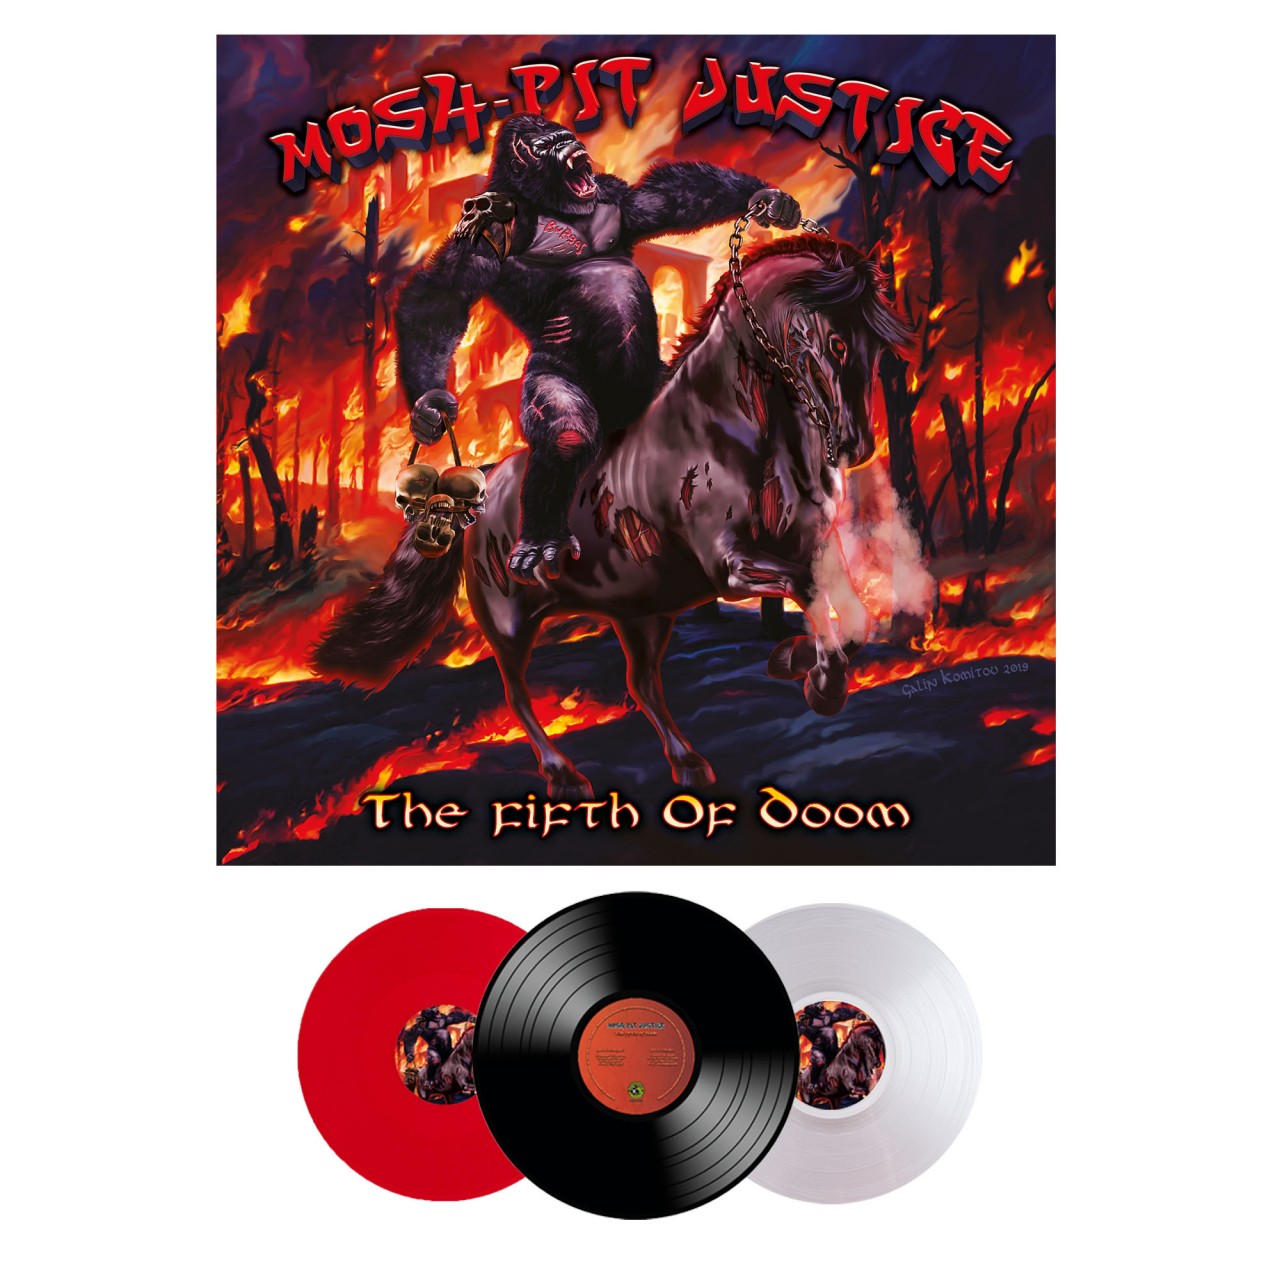 Mosh Pit Justice - The Fifth of Doom